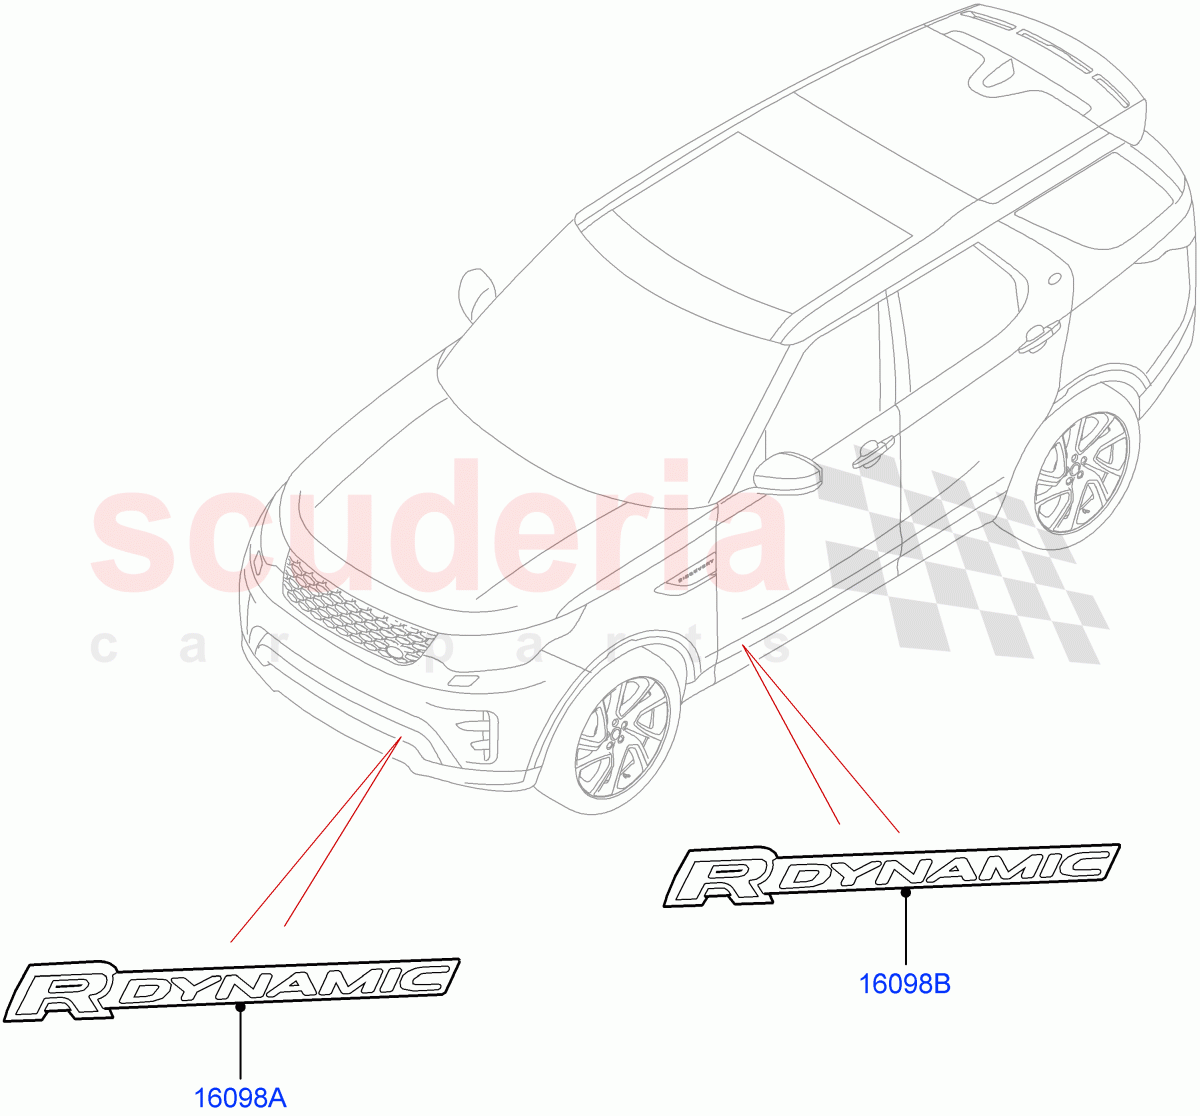 Name Plates(Nitra Plant Build)(Version - R-Dynamic)((V)FROMM2000001) of Land Rover Land Rover Discovery 5 (2017+) [3.0 I6 Turbo Diesel AJ20D6]